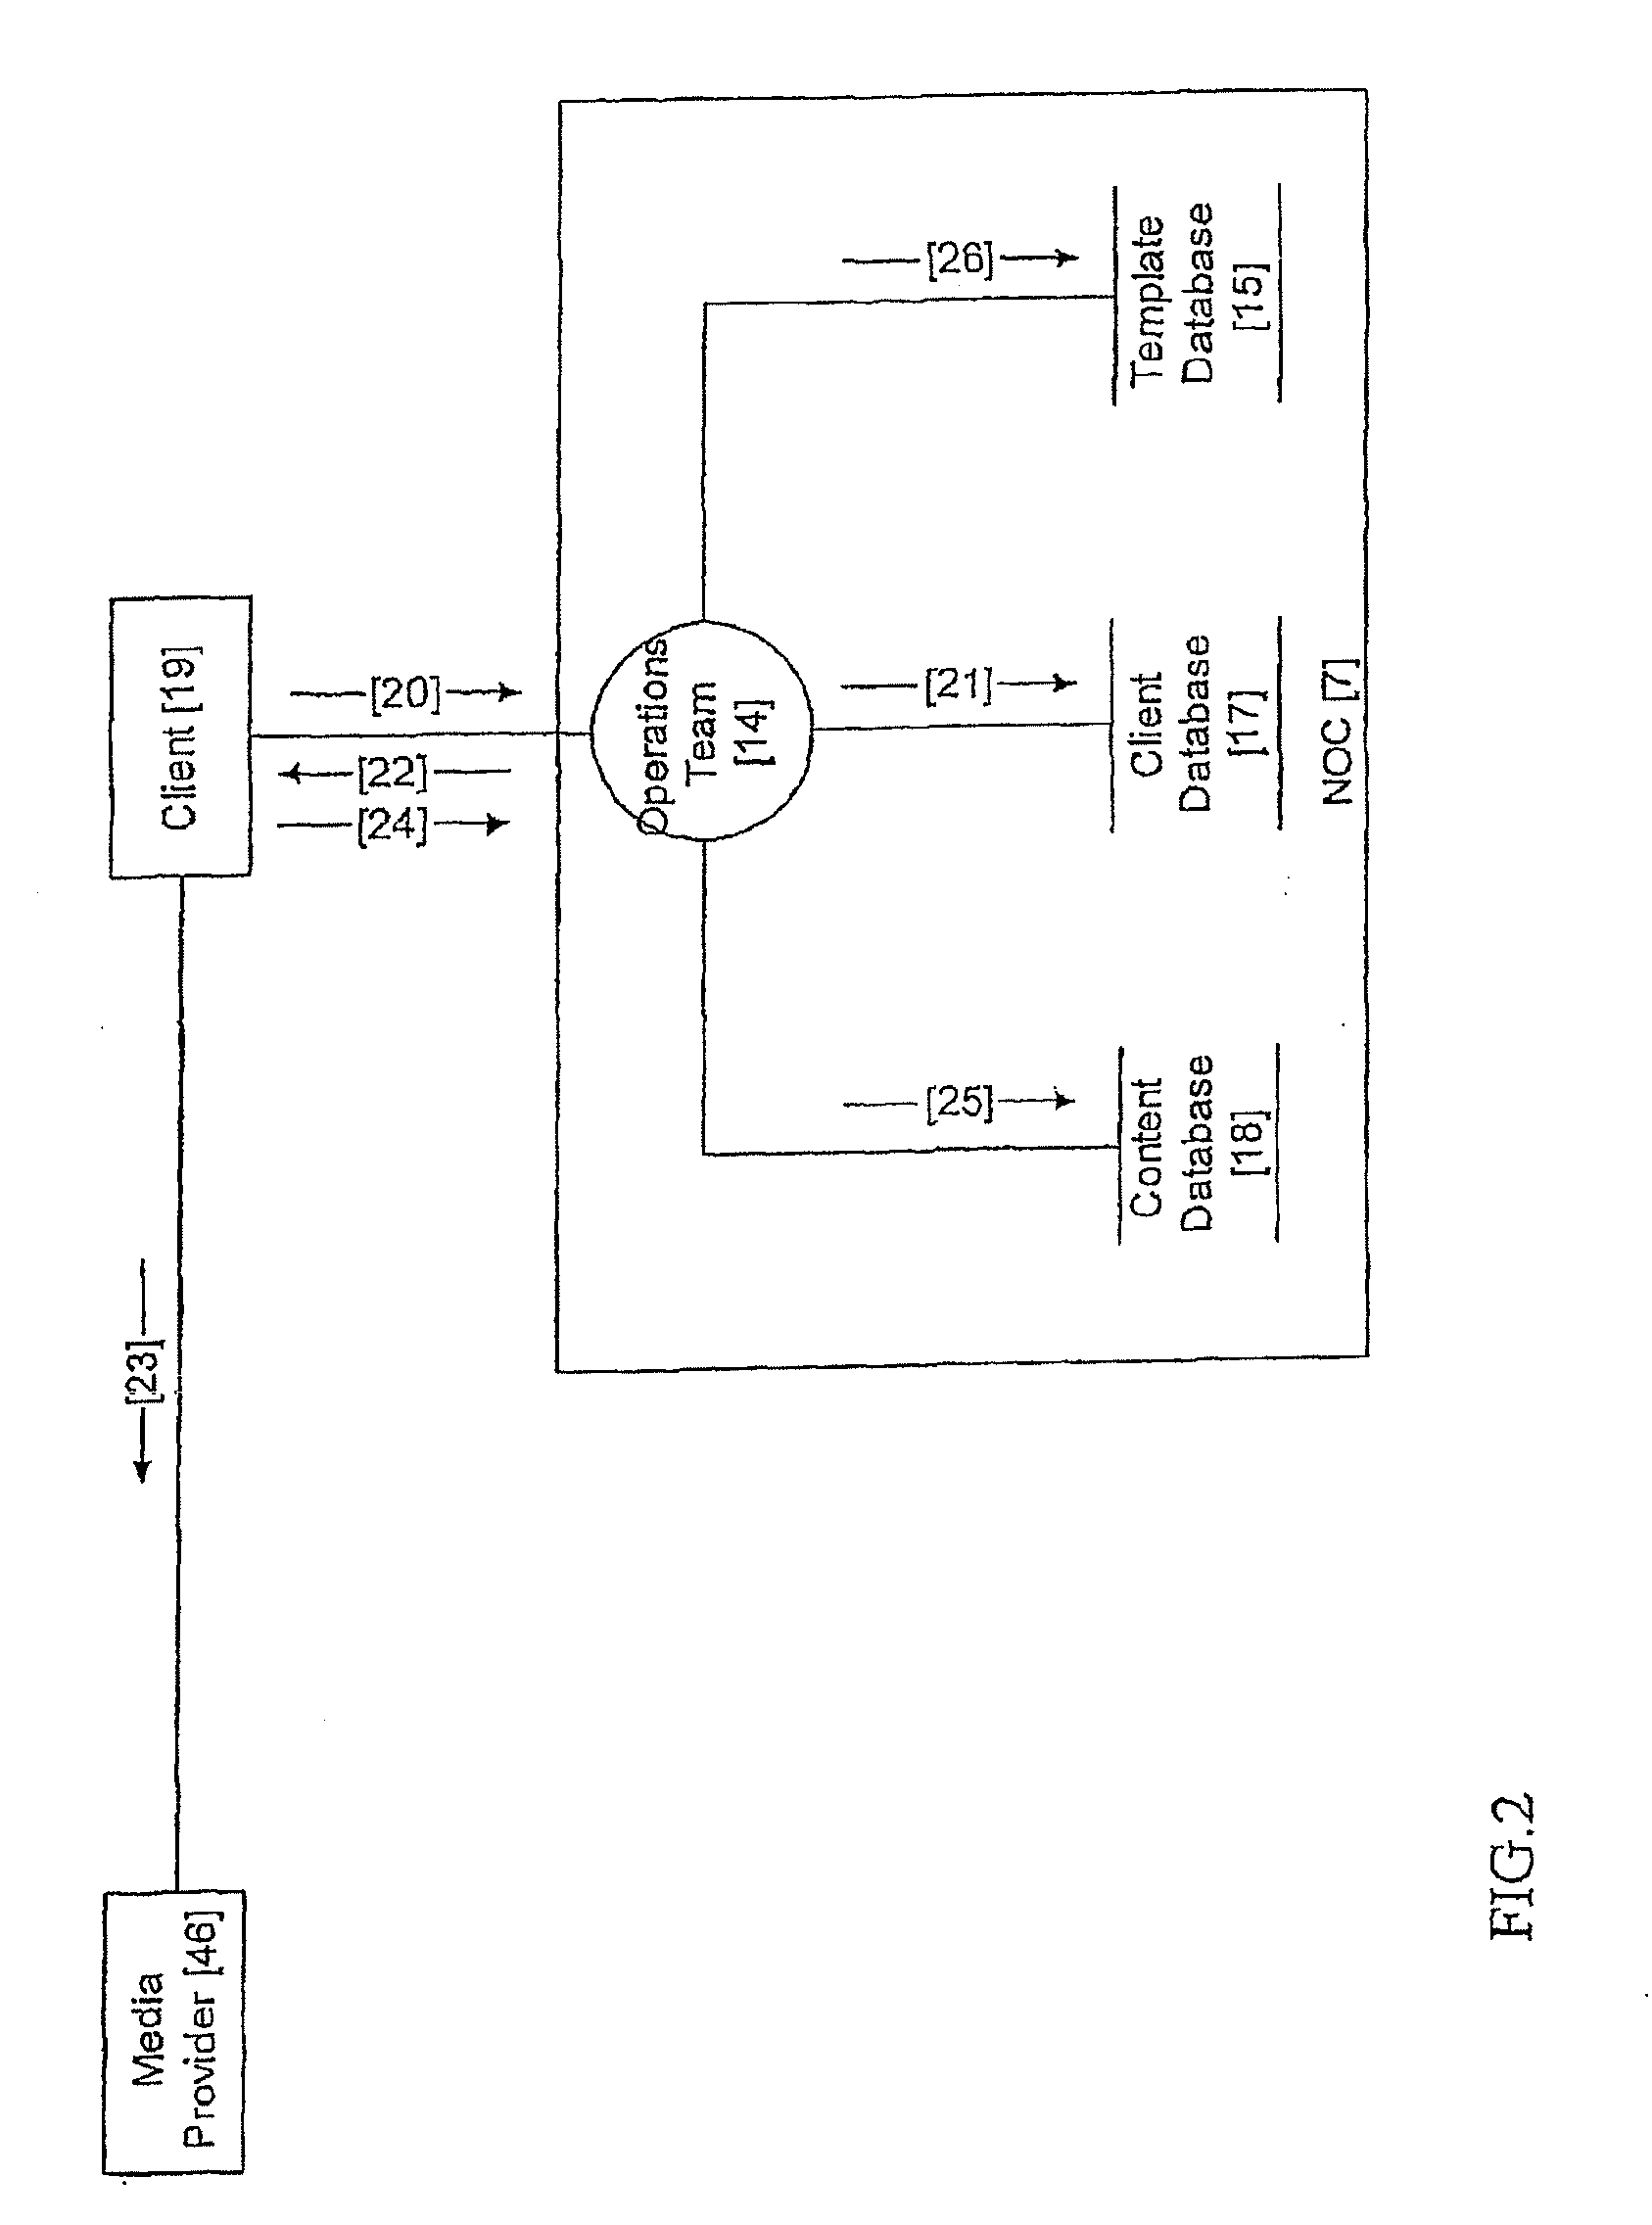 System and method for distributing targeted content